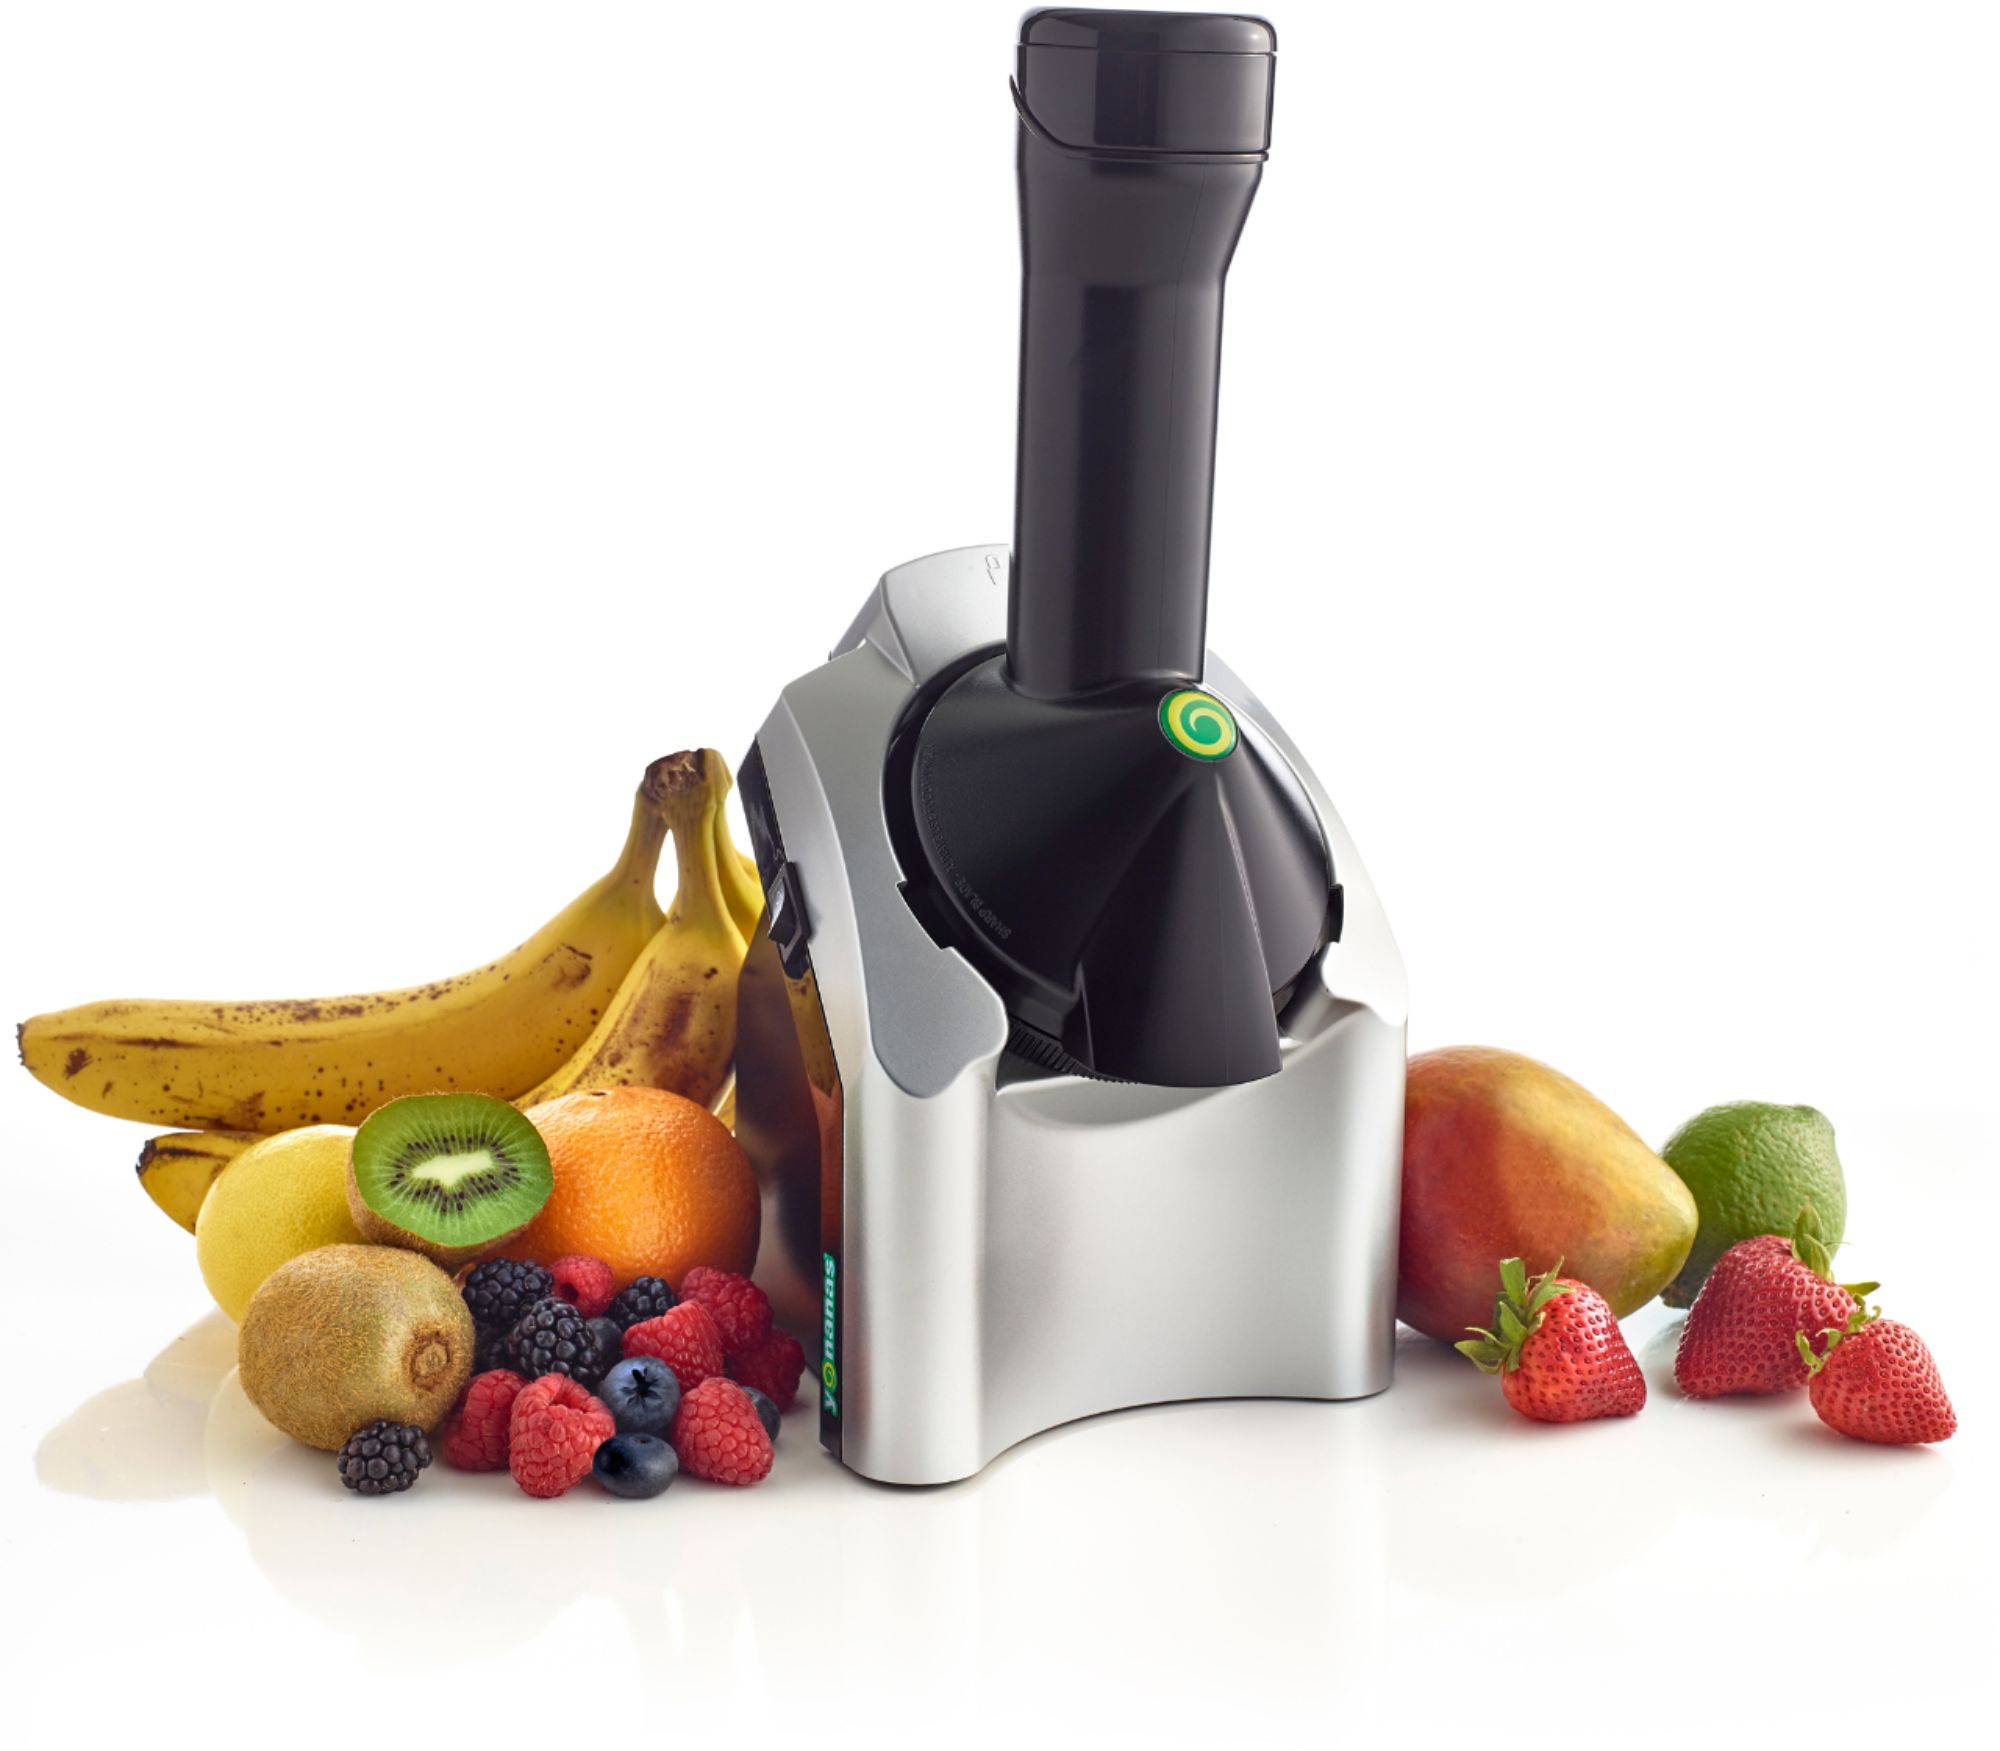 With Yonanas, the answer is: Yes, we have bananas